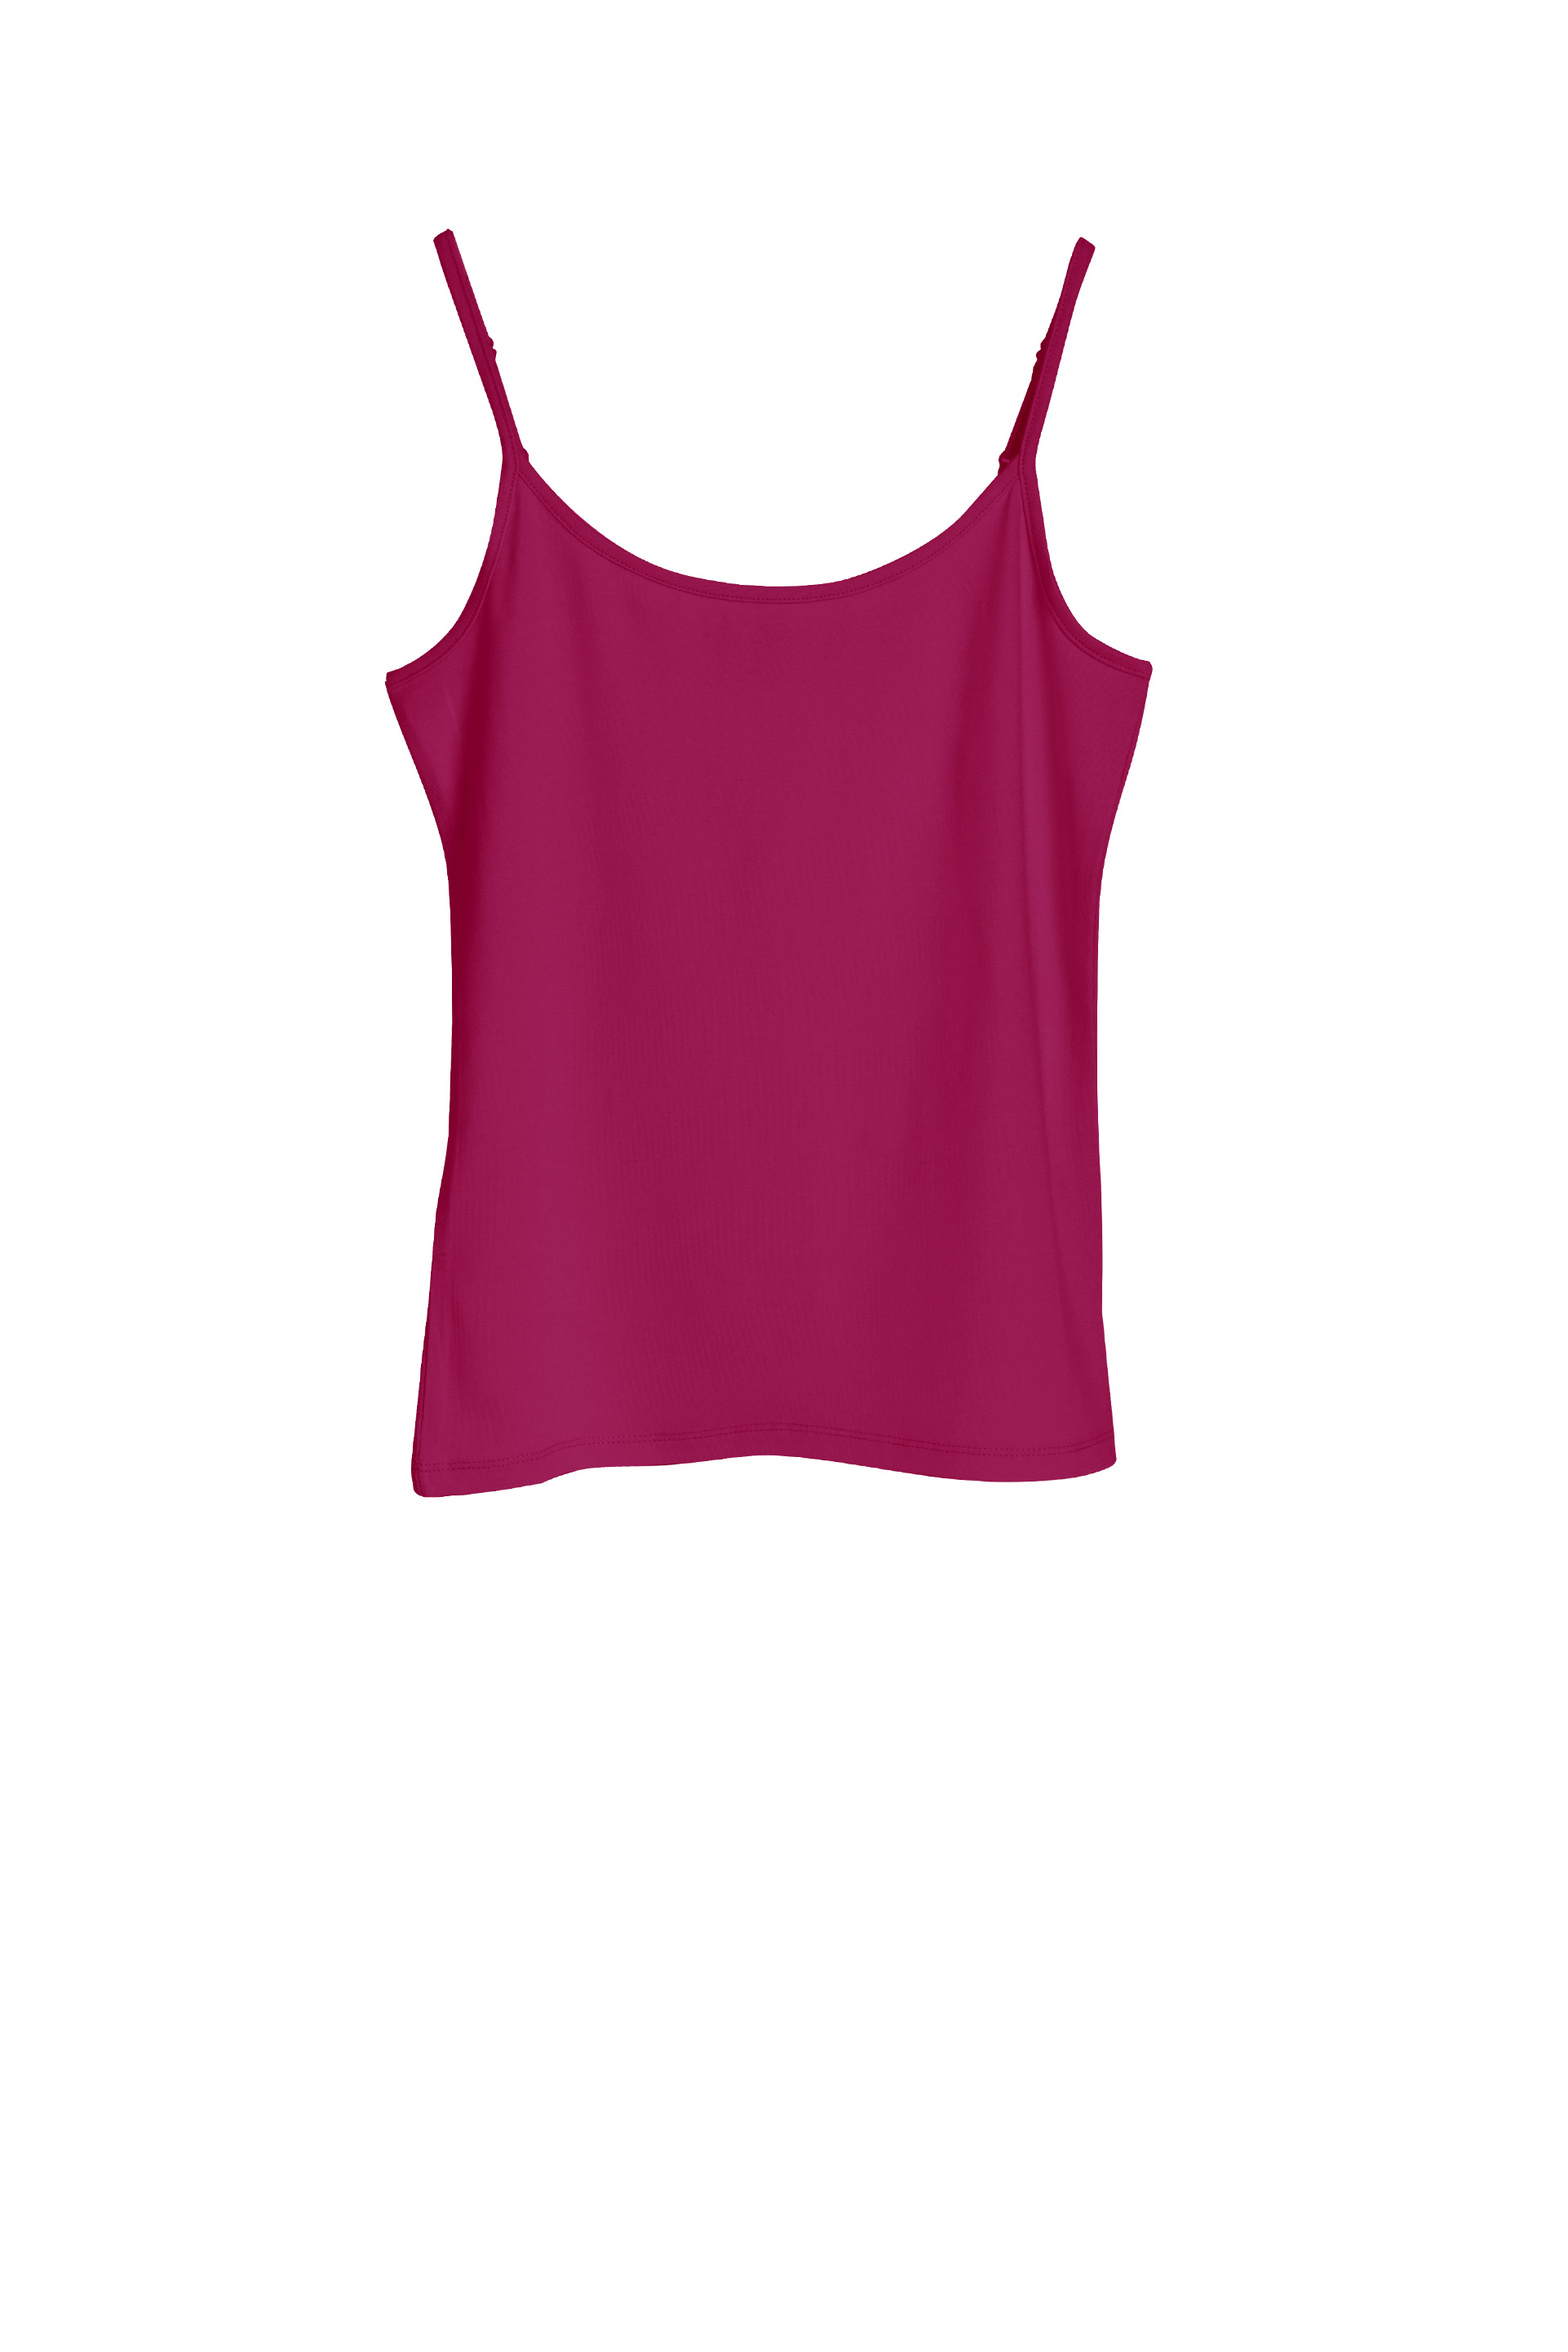 7090_camisole_mulberry_new.jpg